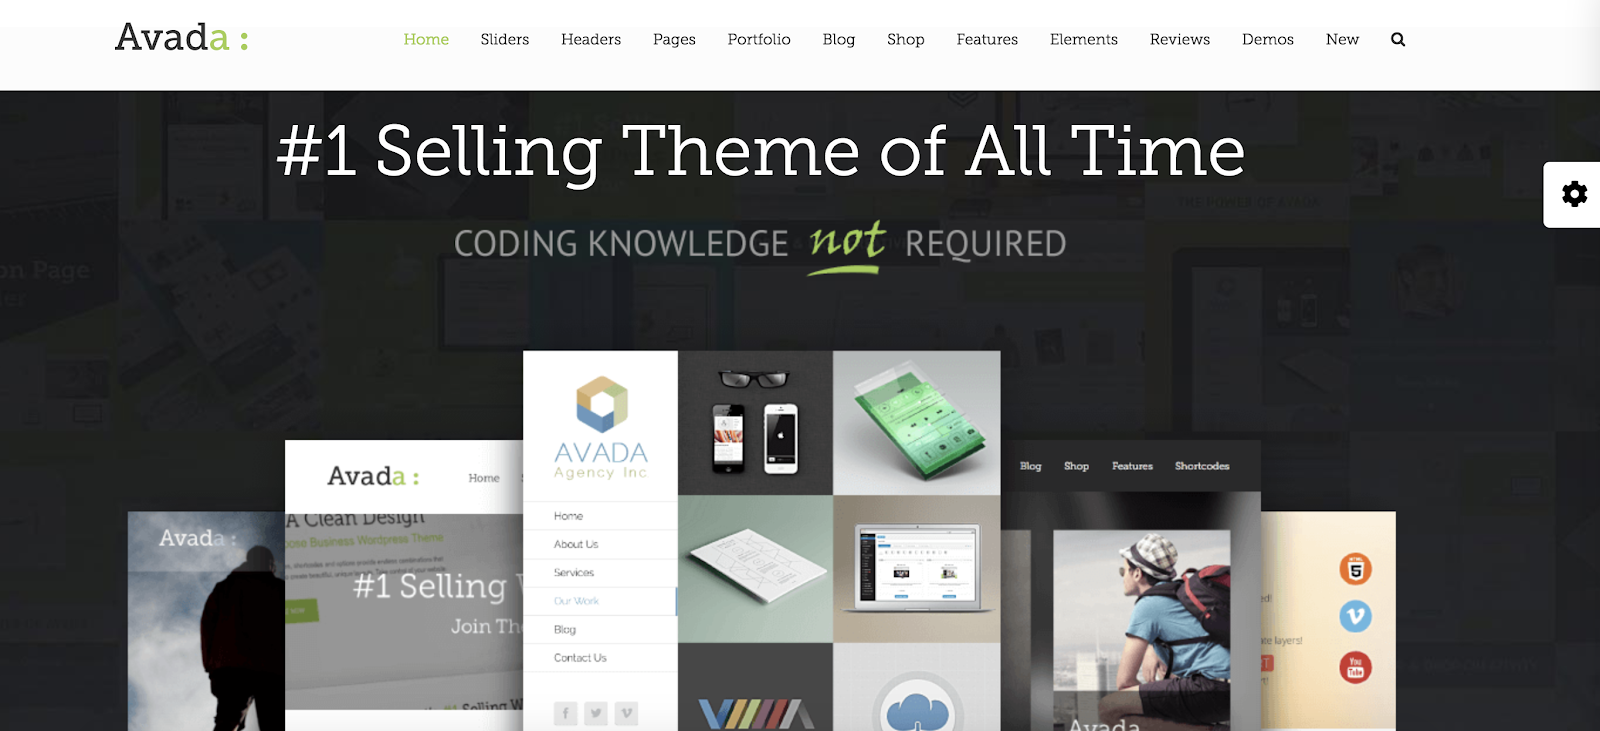 The%2022%20Best%20WordPress%20Themes%20and%20Templates%20in%202019 10